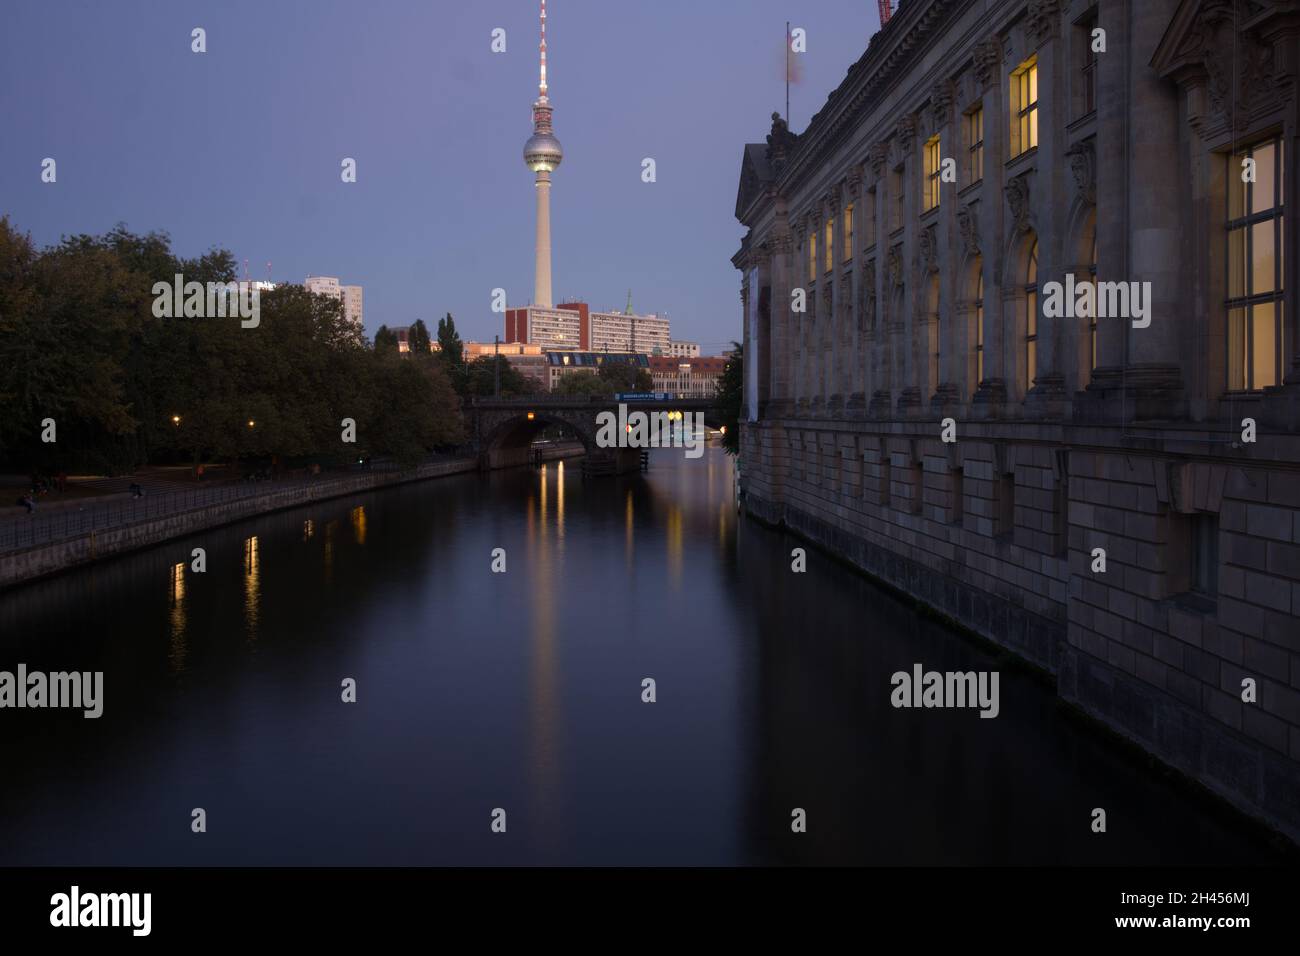 Berlin at Night during The Blue Hour With A Beautiful View From The Museum Island On The Spree Towards The Reichstag Building. Stock Photo